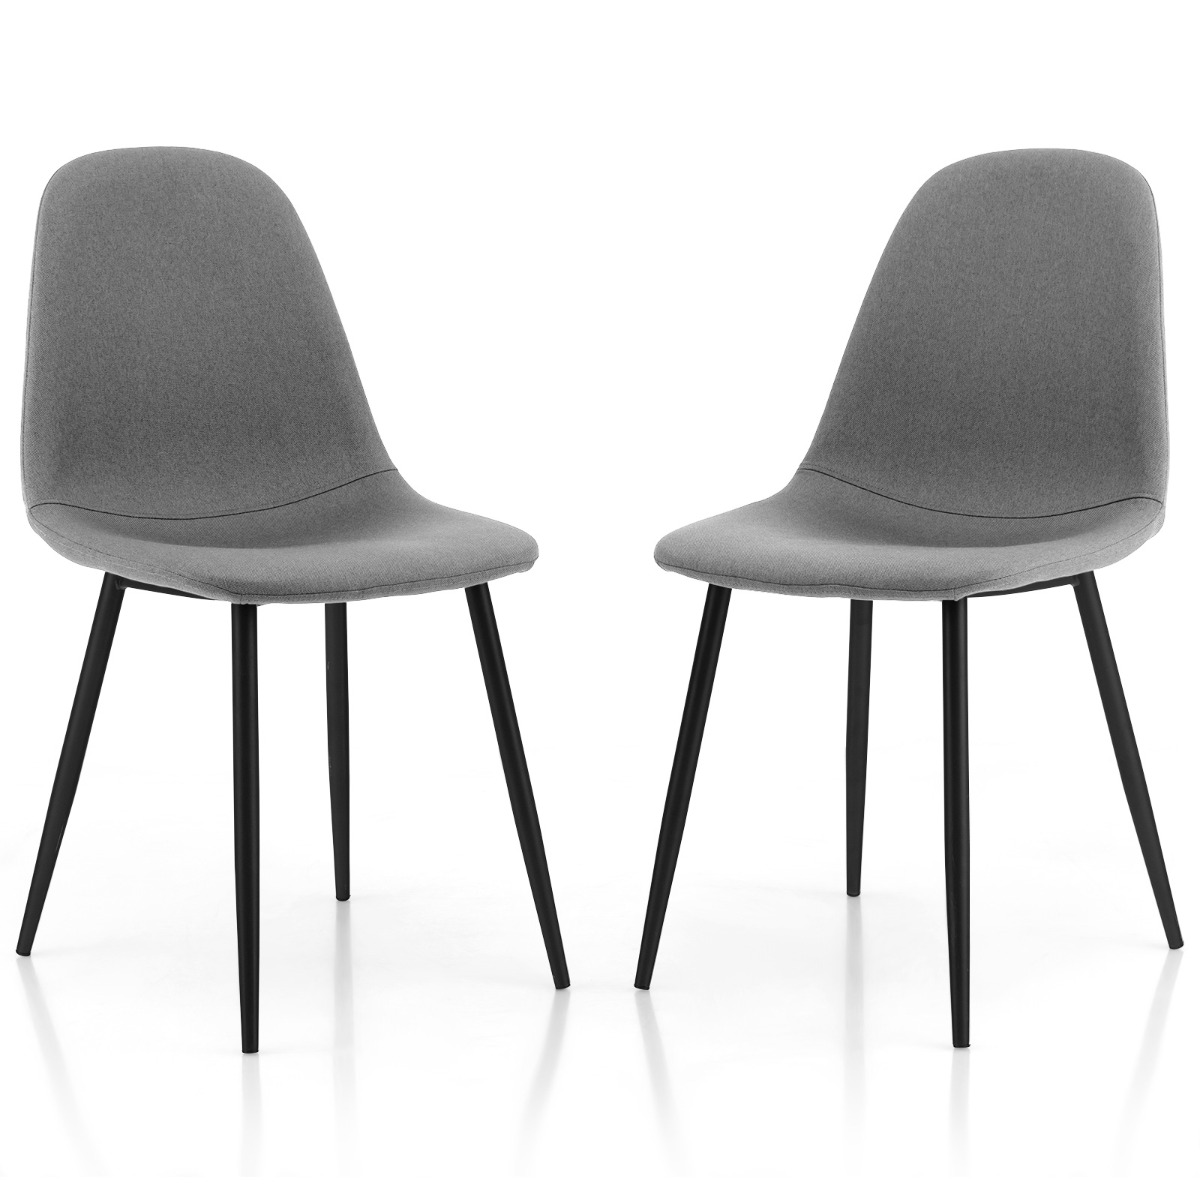 Upholstered Dining Chairs Set of 2 with Metal Legs-Grey